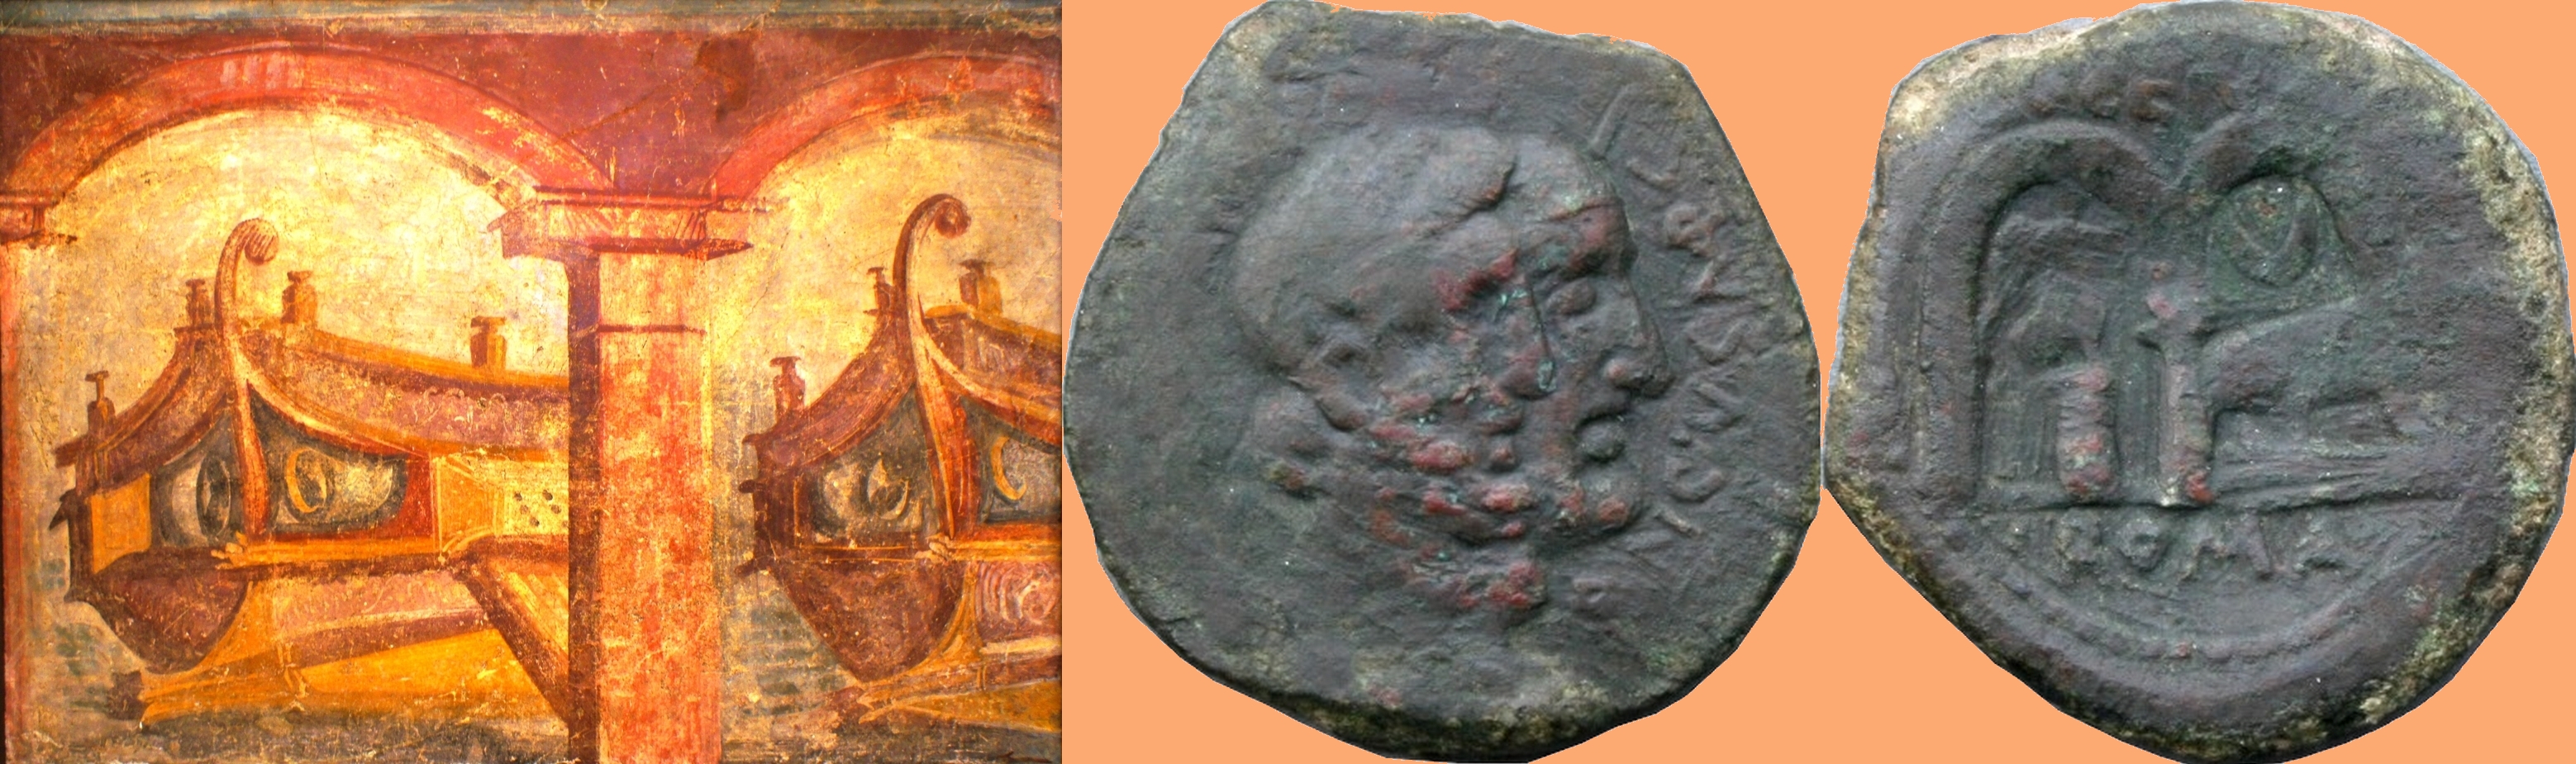 346/3 coin of Censorinus 88BC with statue, Two Arches and a Ship, beside a Pompeian painting of Two Arches and Two Ships in harbour